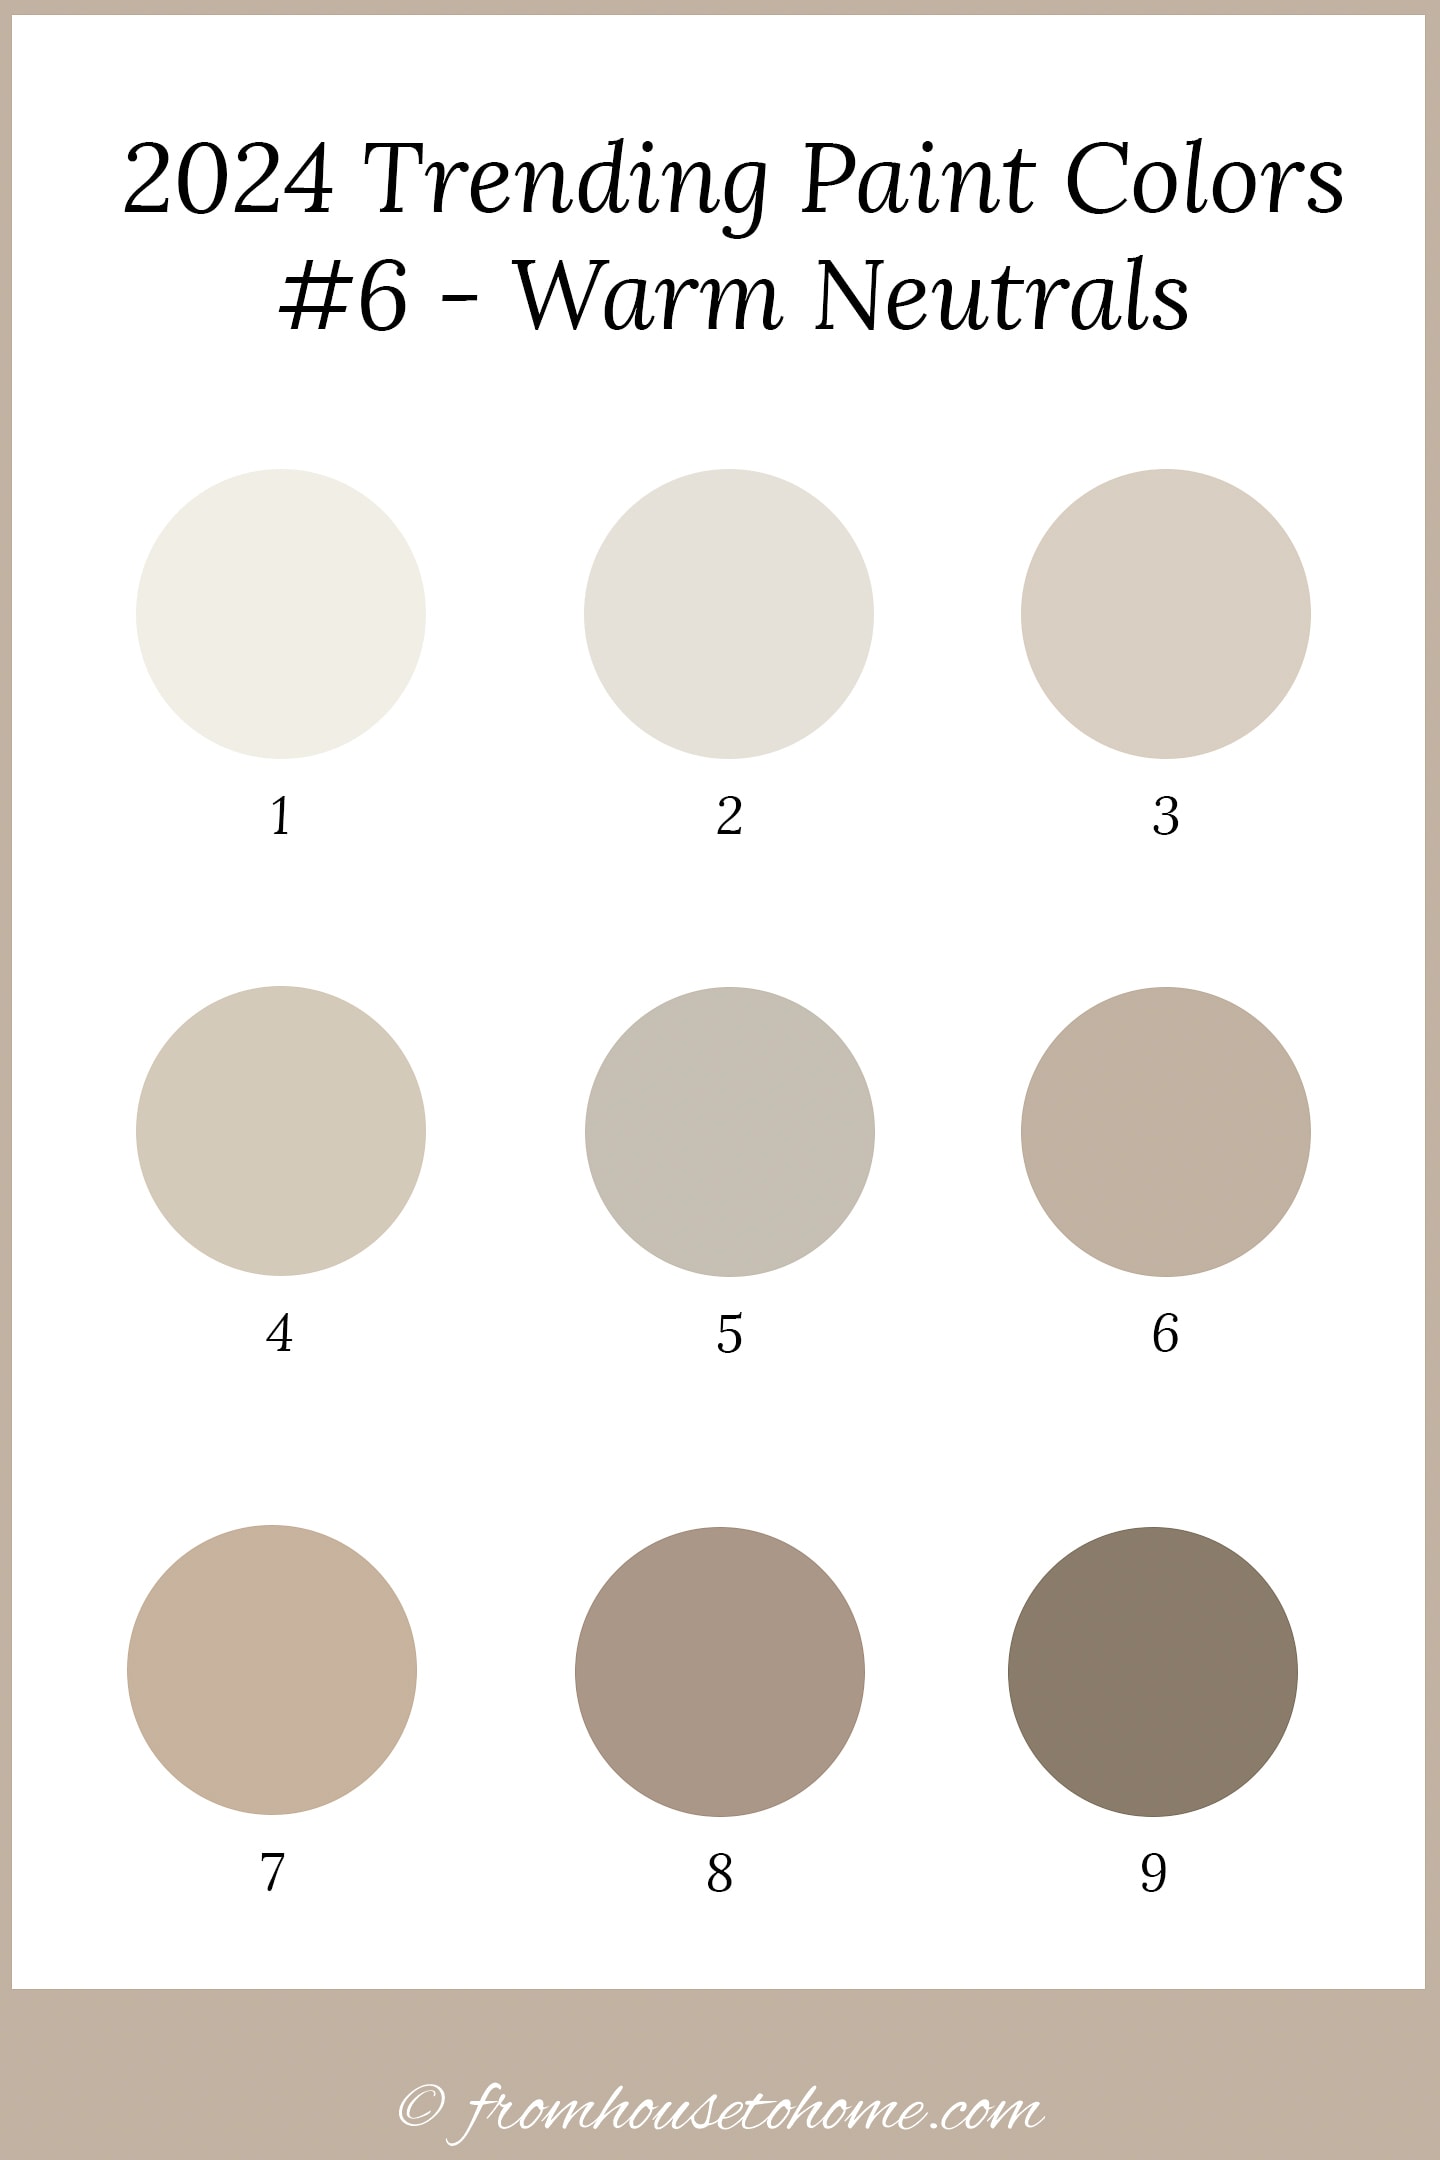 9 paint colors that are part of the warm neutral color trend for 2024